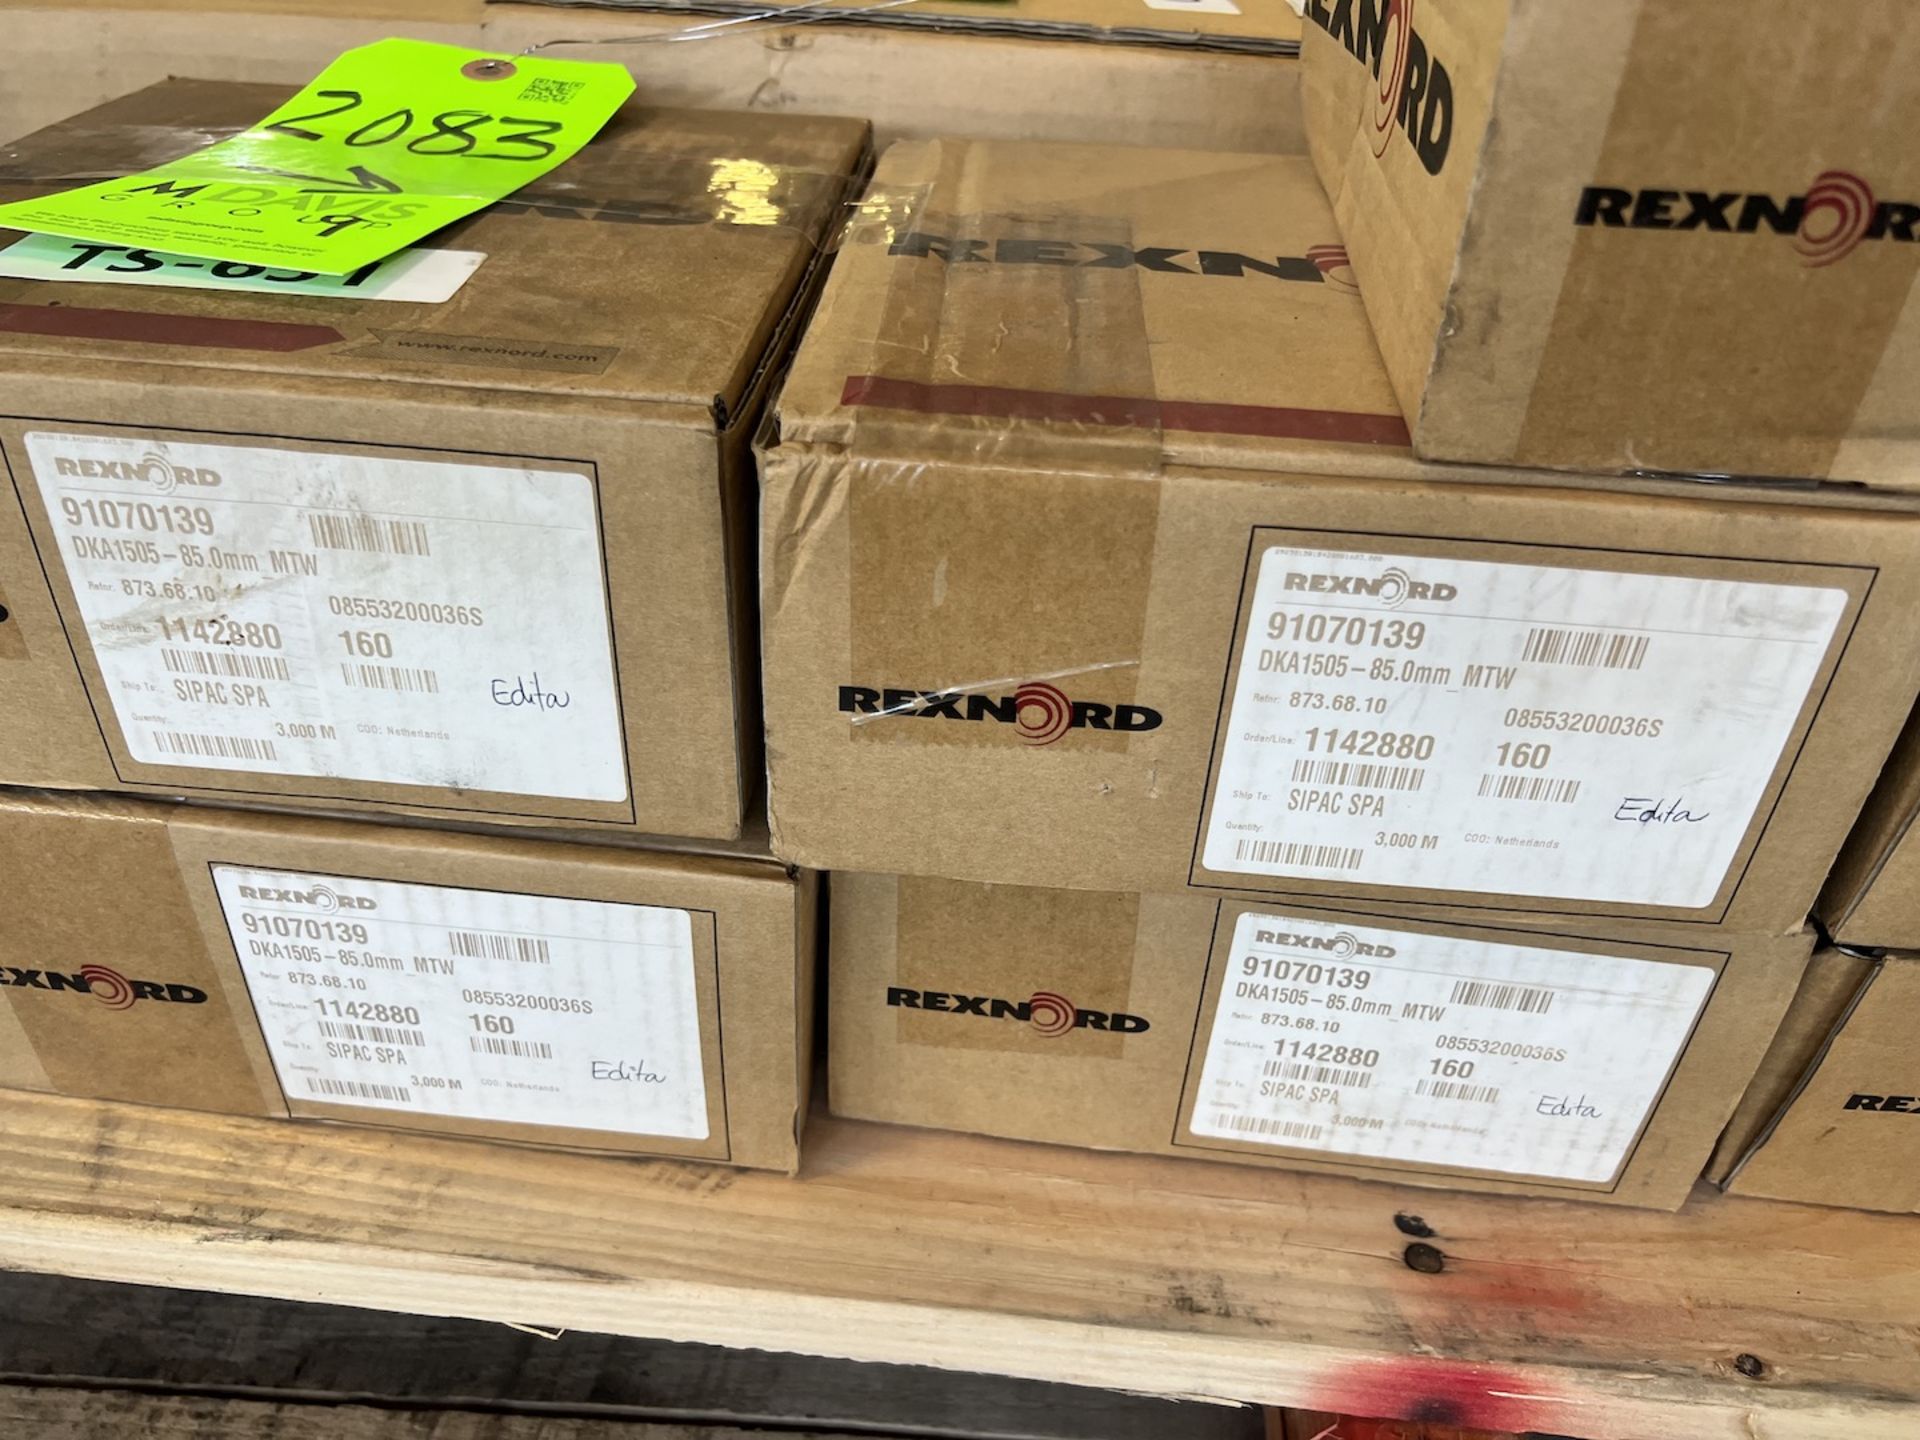 (9) BOXES OF NEW Rexnord MatTop Chain DKA1505-85MM, 85 MM Wide, Part # 91070139, Box of 3,000 M - Image 3 of 4